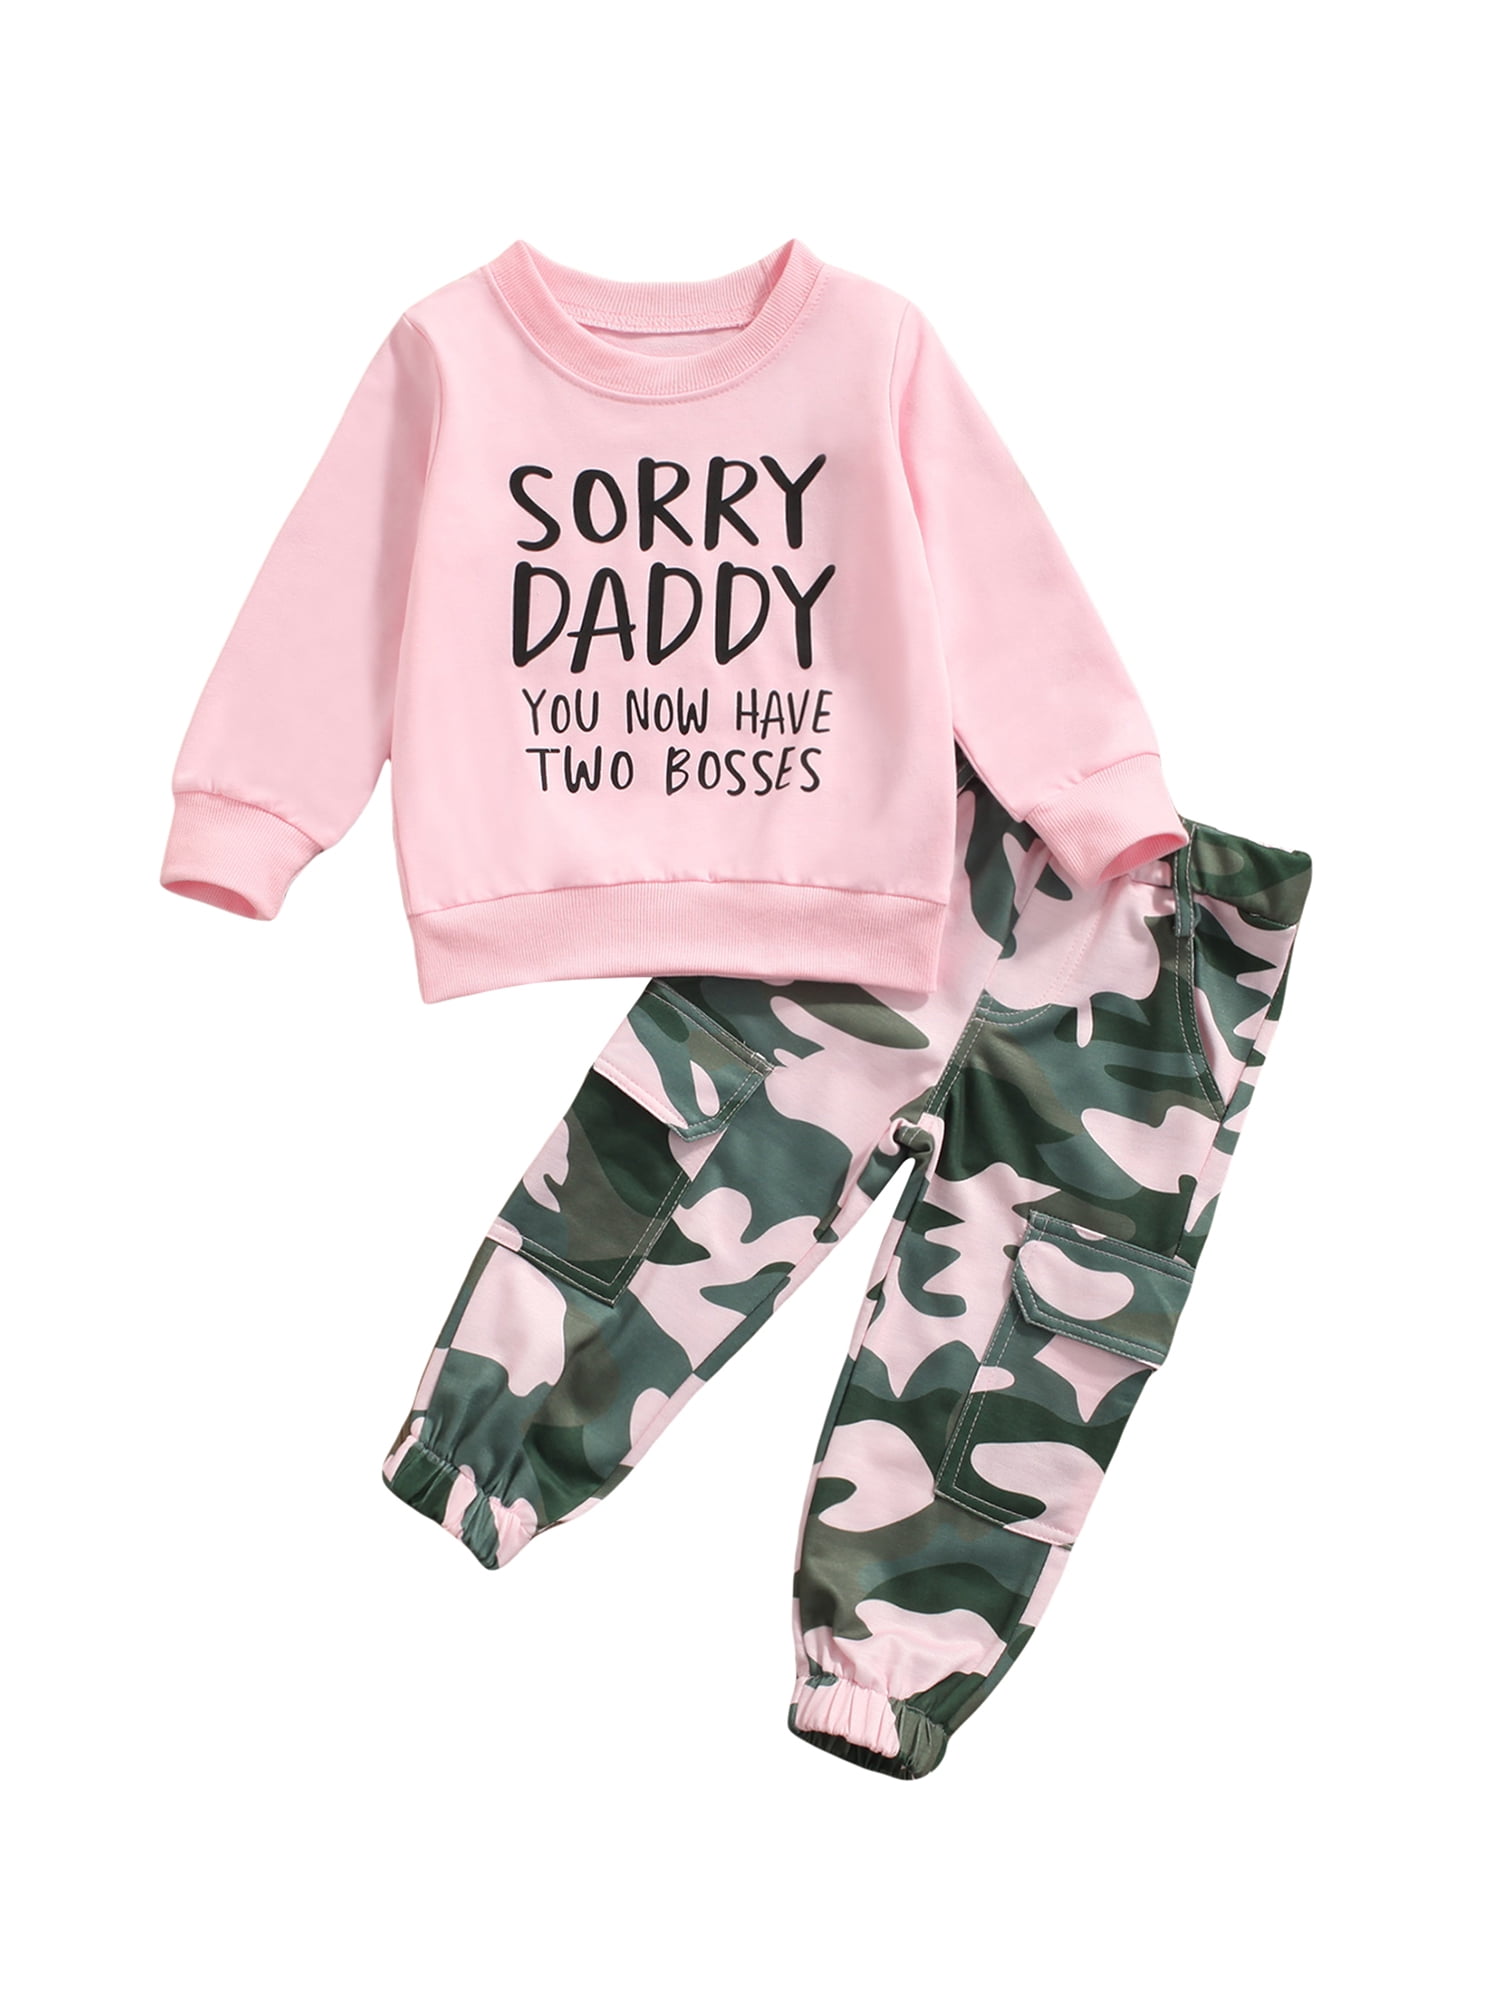 Toddler Boys Girls Camouflage Print Hoodies Romper,Coat,Shirt & Pant for Camo Series Clothes 